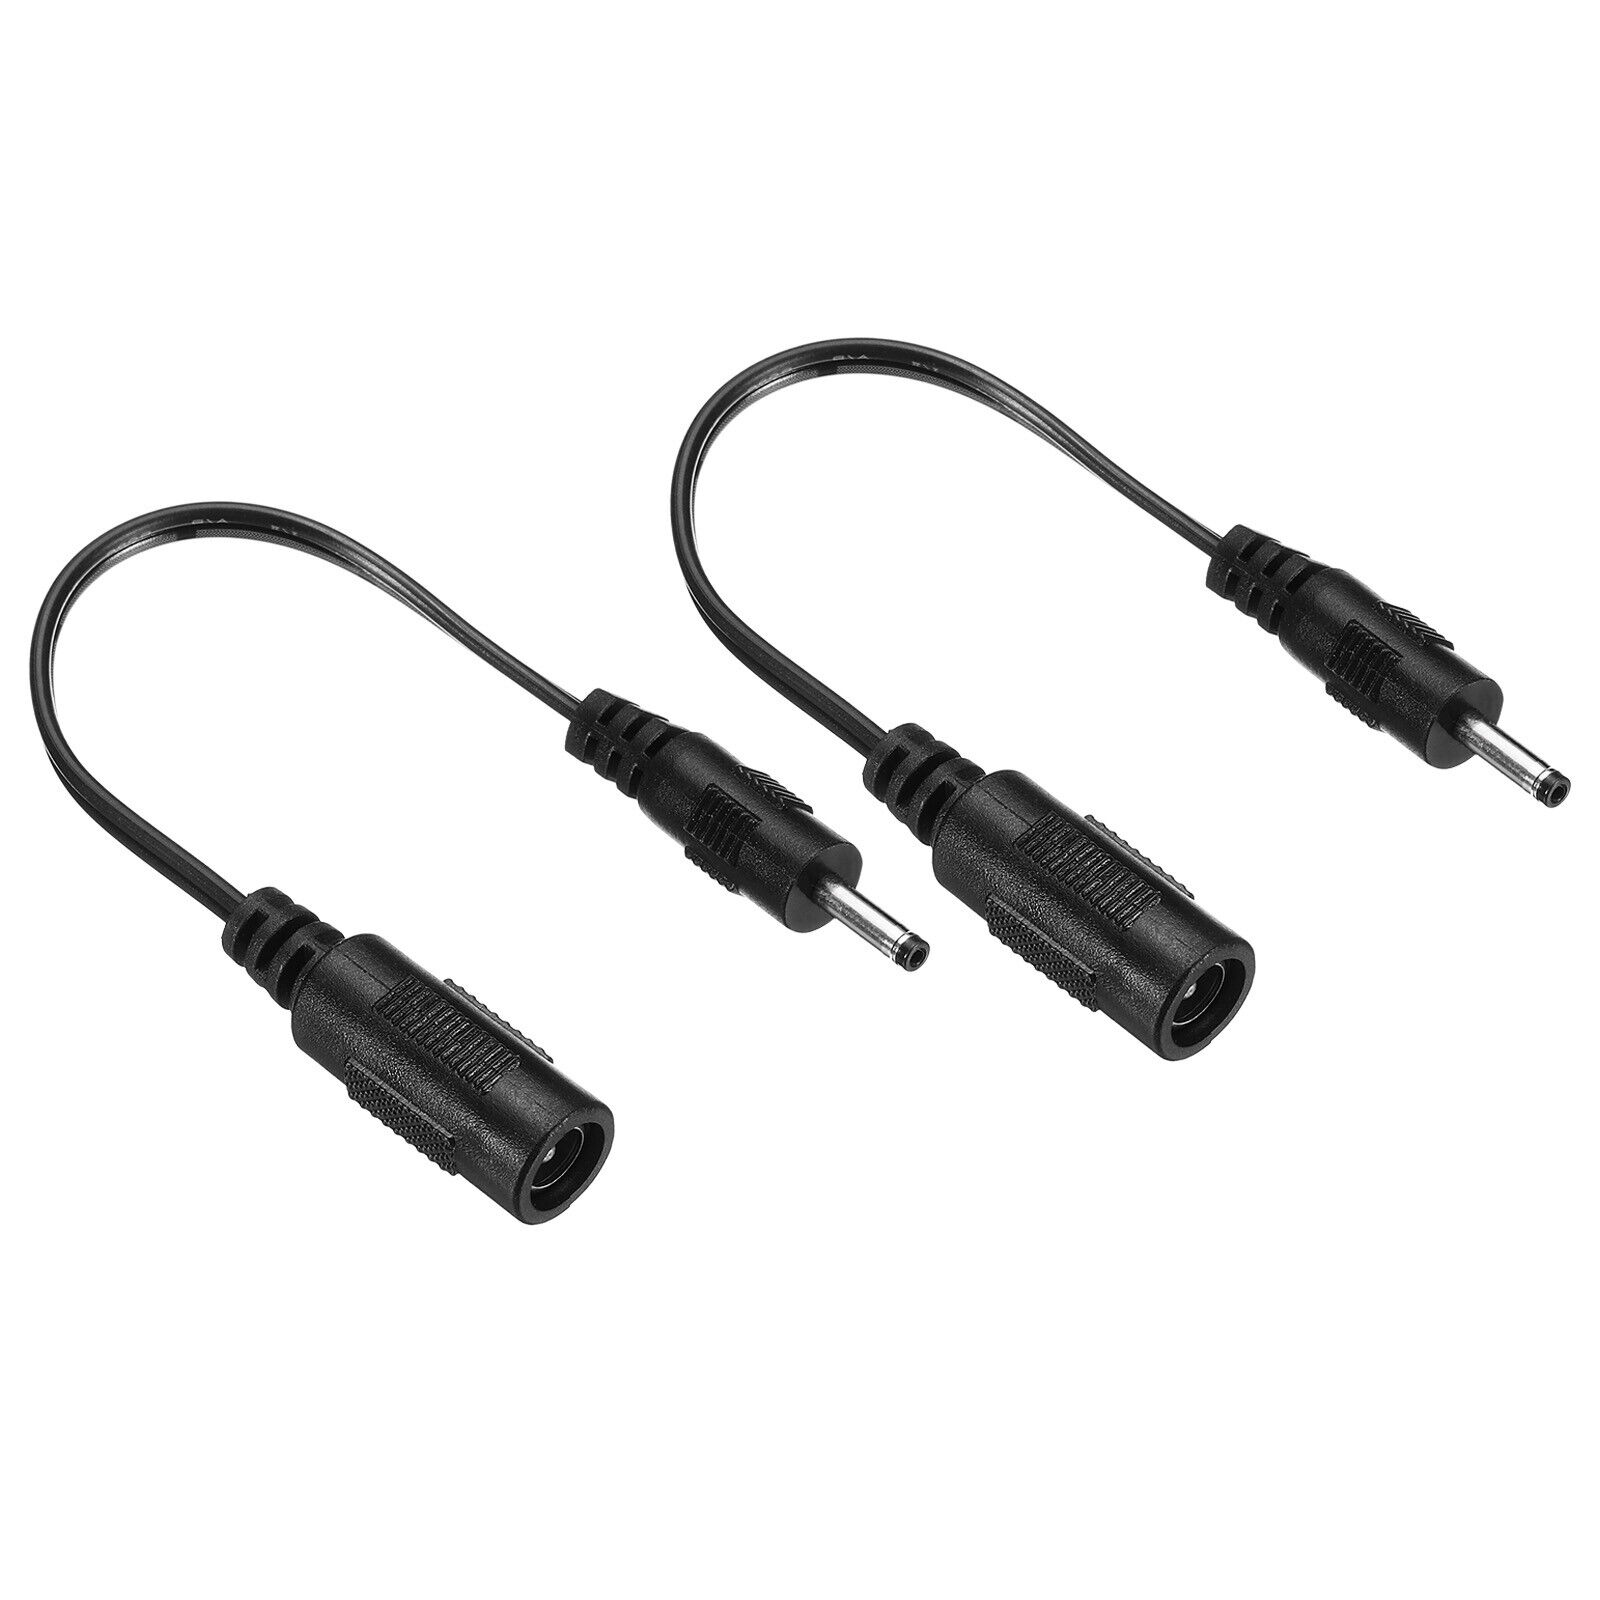 2Pcs DC 5.5x2.1mm Female to 3x1.1mm Male Extension Cable Adapter Cord Black